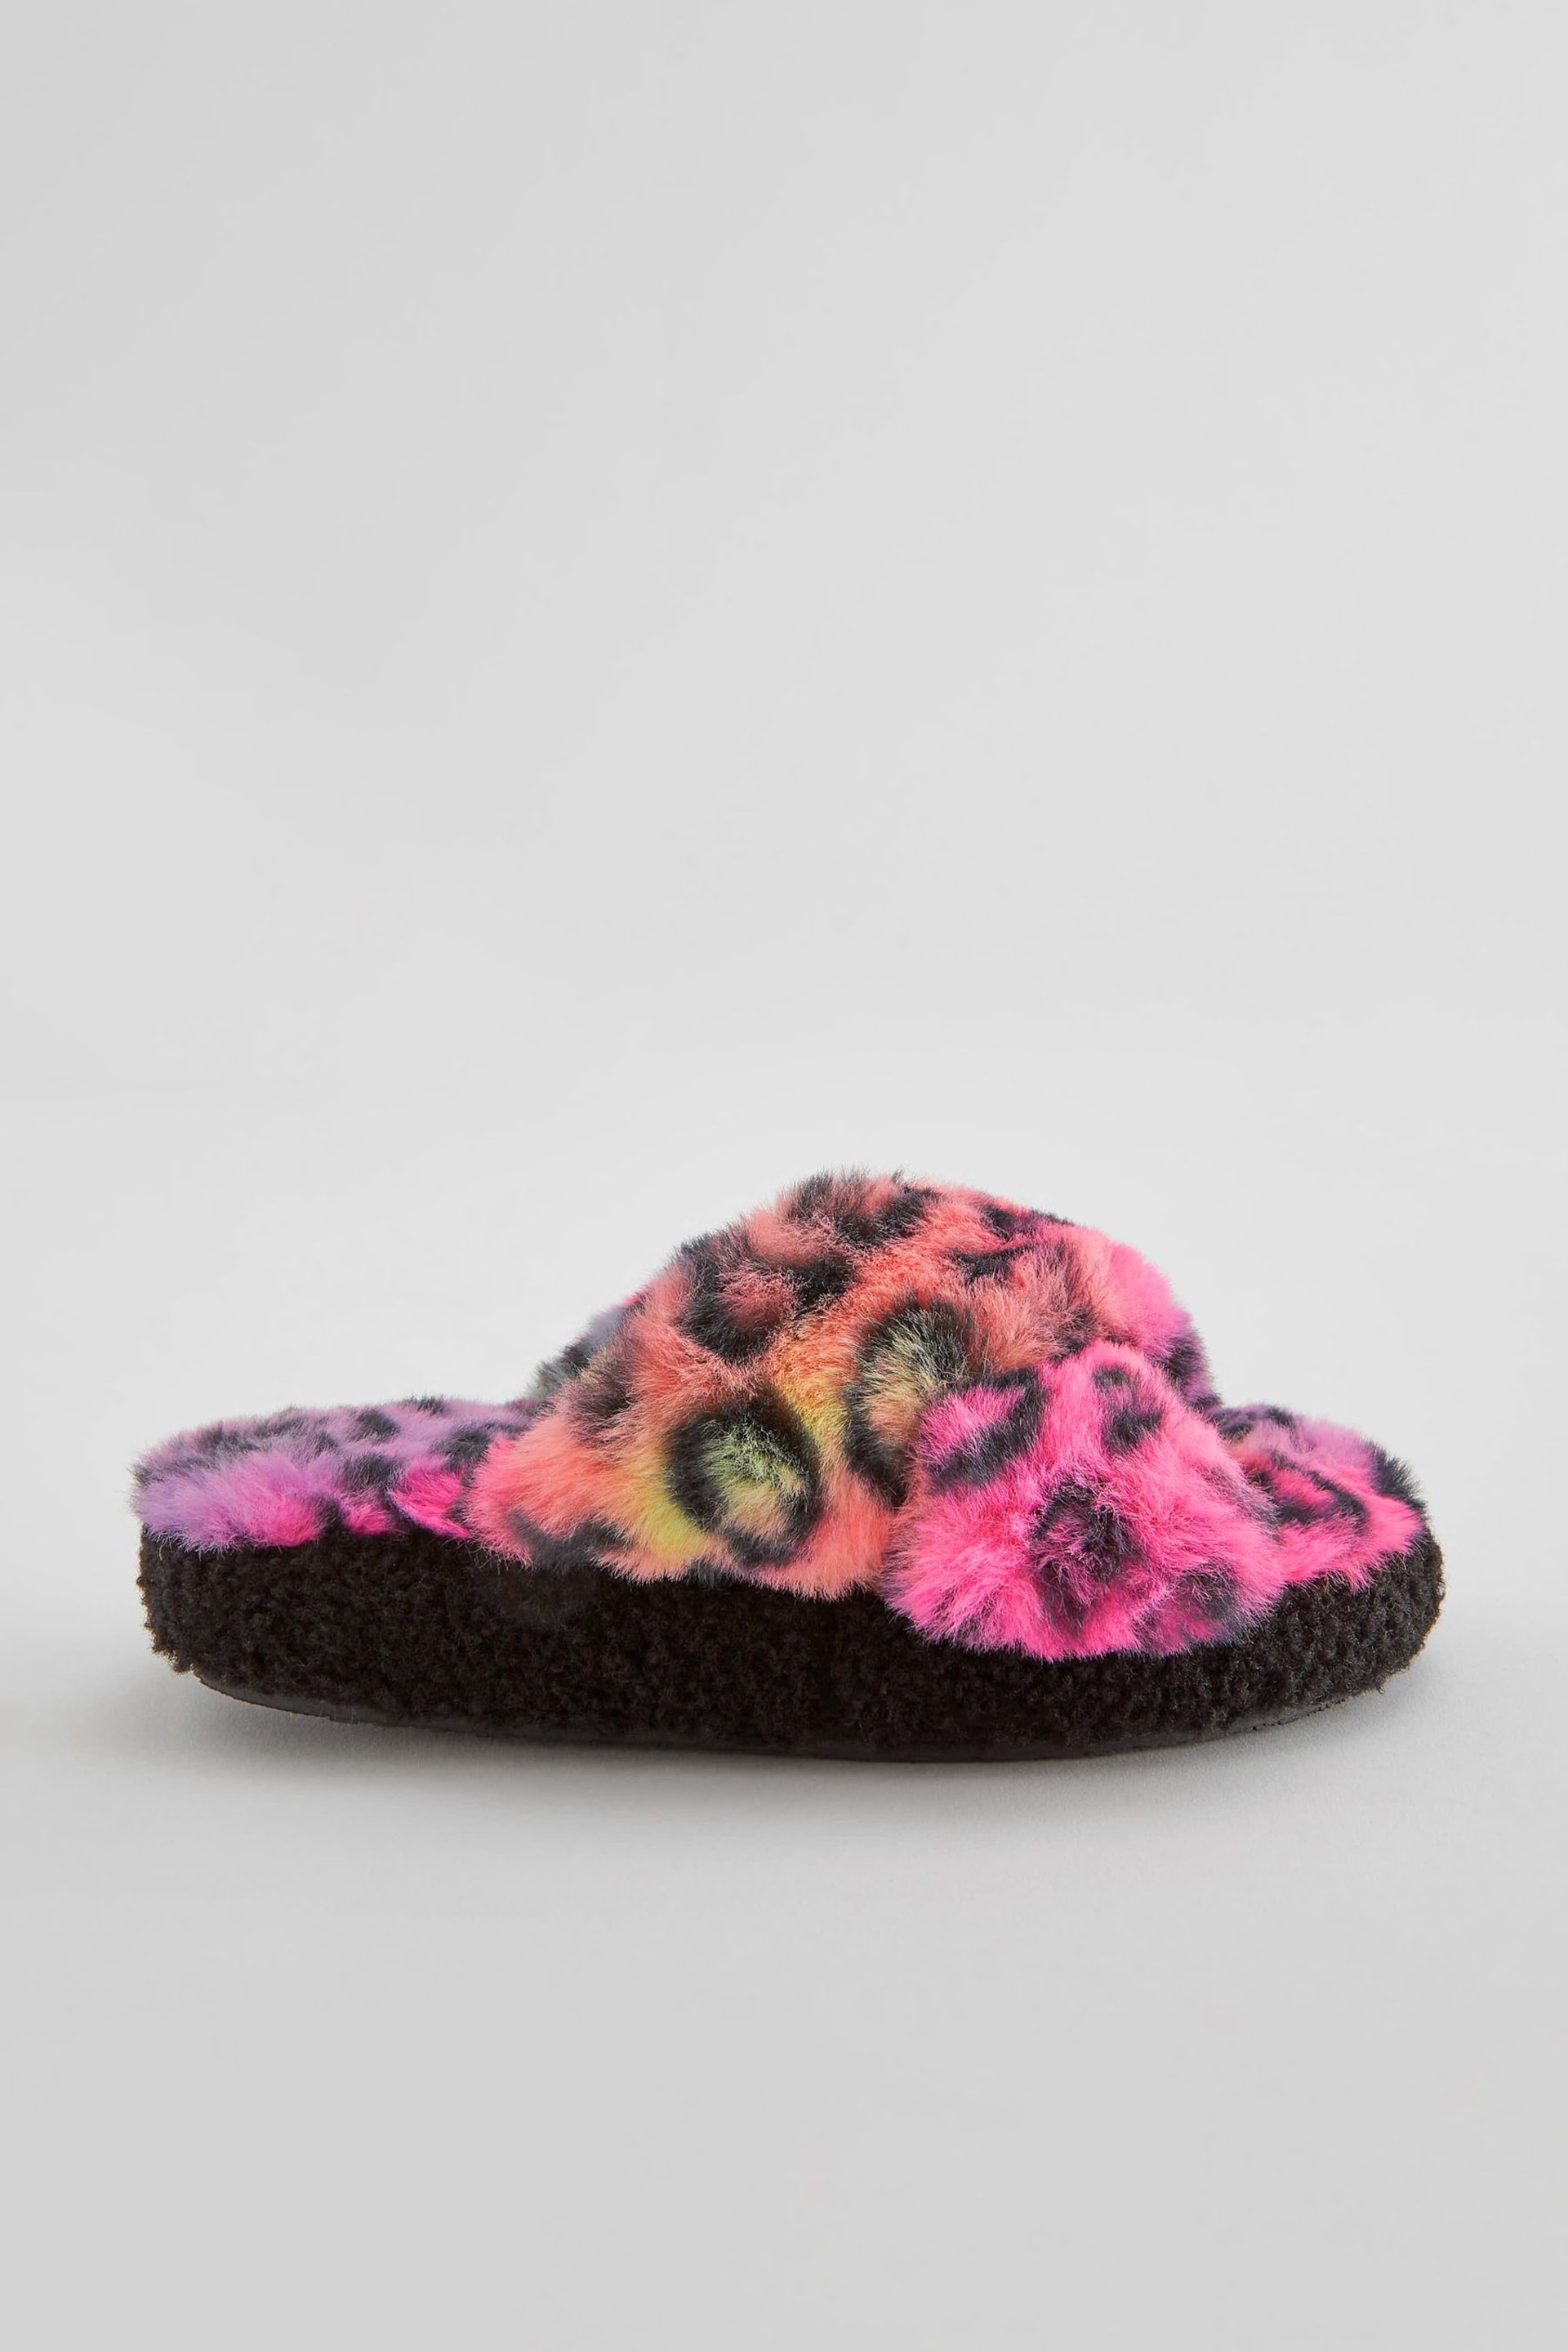 Bright Animal Print Faux Fur Slider Slippers - Image 5 of 9